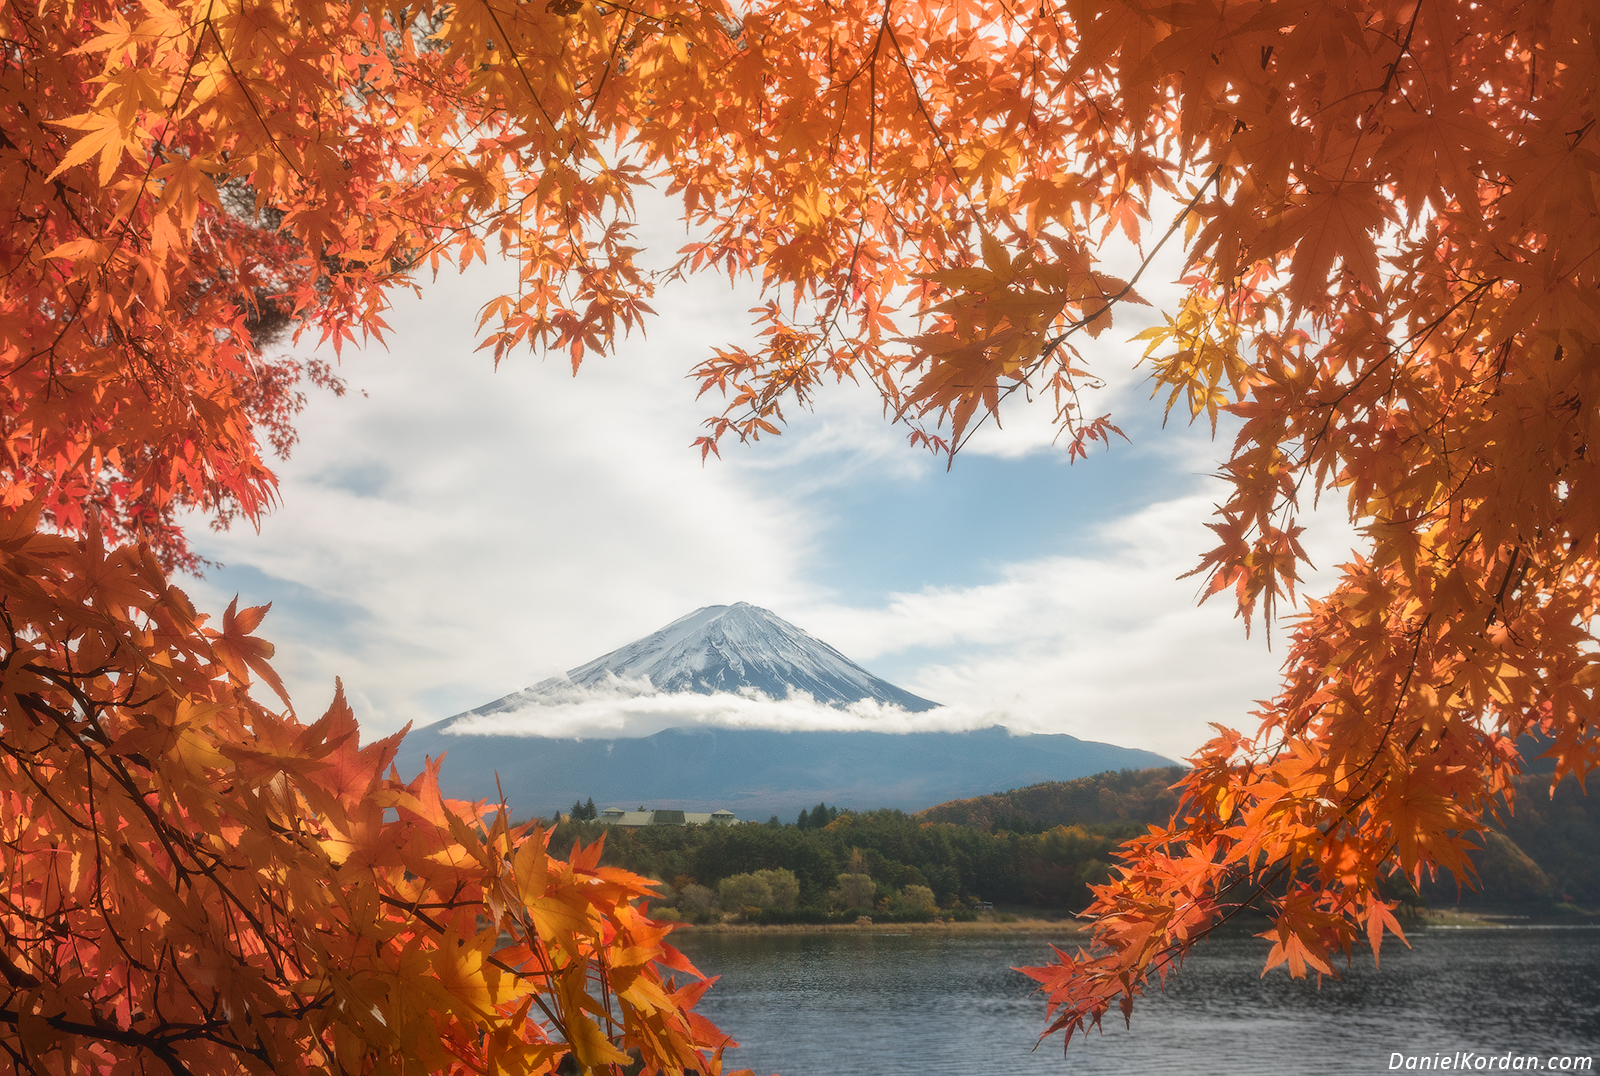 Japan in red: autumn leaves photo tour, 10 – 18 November, 19 – 27